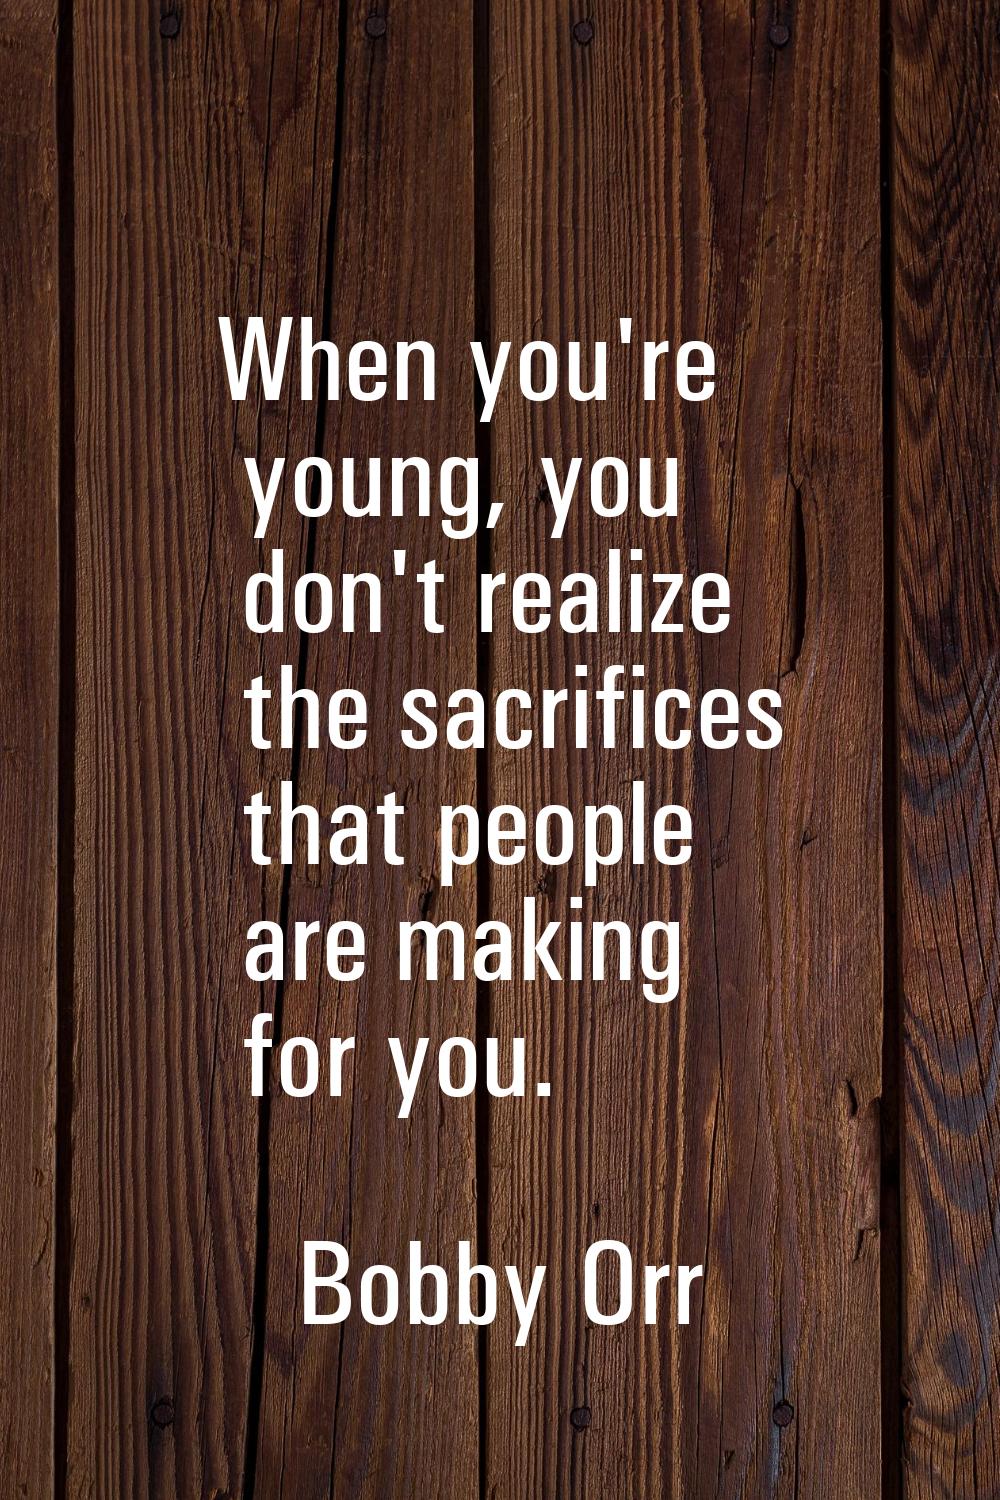 When you're young, you don't realize the sacrifices that people are making for you.